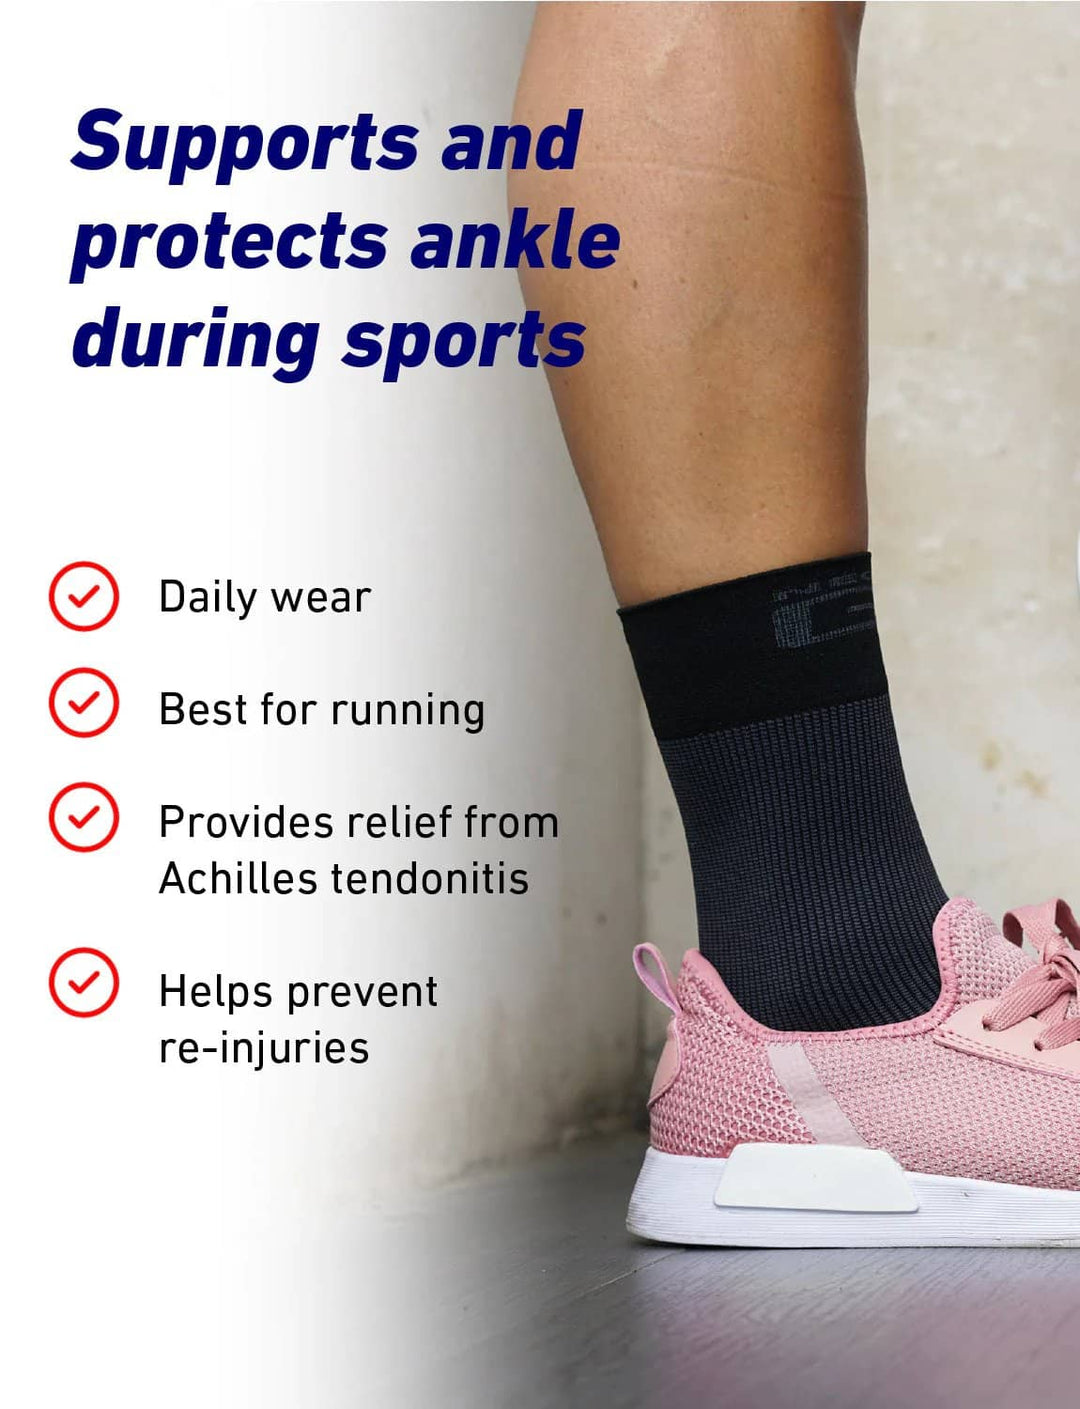 neo g ankle compression support benefits